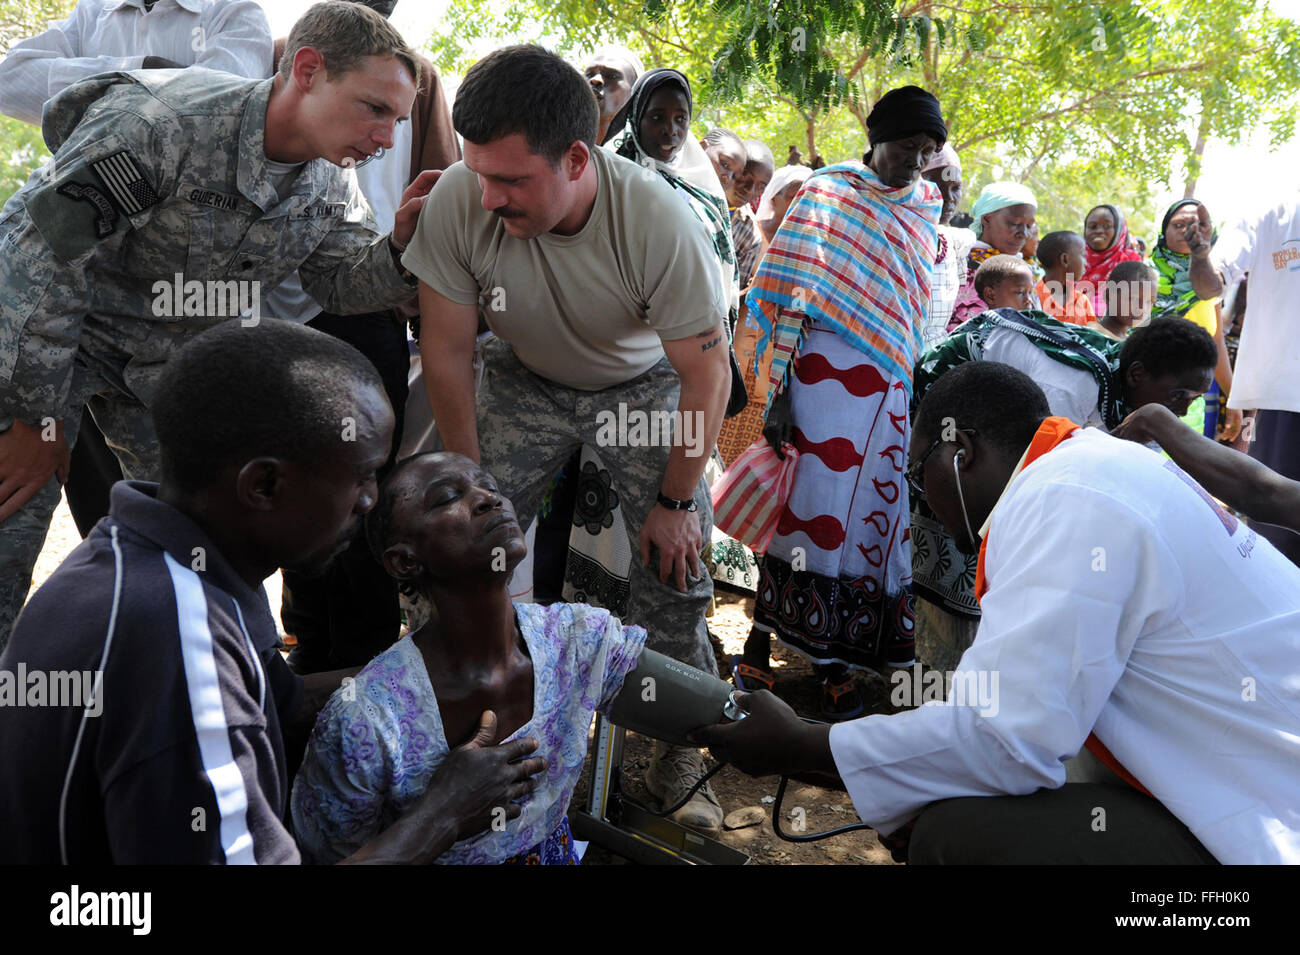 U.S. Army Staff Sgt. Matthew Hoffman, Headquarters and Headquarters Company 448th Civil Affairs Battalion, right, and Spc. Josh Guderian, Maritime Civil Affairs and Security Team sergeant, discuss a patient who collapsed during a Medical Civic Action Program, or MEDCAP, in Lunga Lunga, Kenya, Aug. 24, 2012. Combined Joint Task Force - Horn of Africa, or CJTF-HOA, was involved in the MEDCAP. CJTF-HOA participates in many MEDCAPs across East Africa, aiming to strengthen the capabilities of community health workers, enhance overall community health, provide medical care to underserved communities Stock Photo